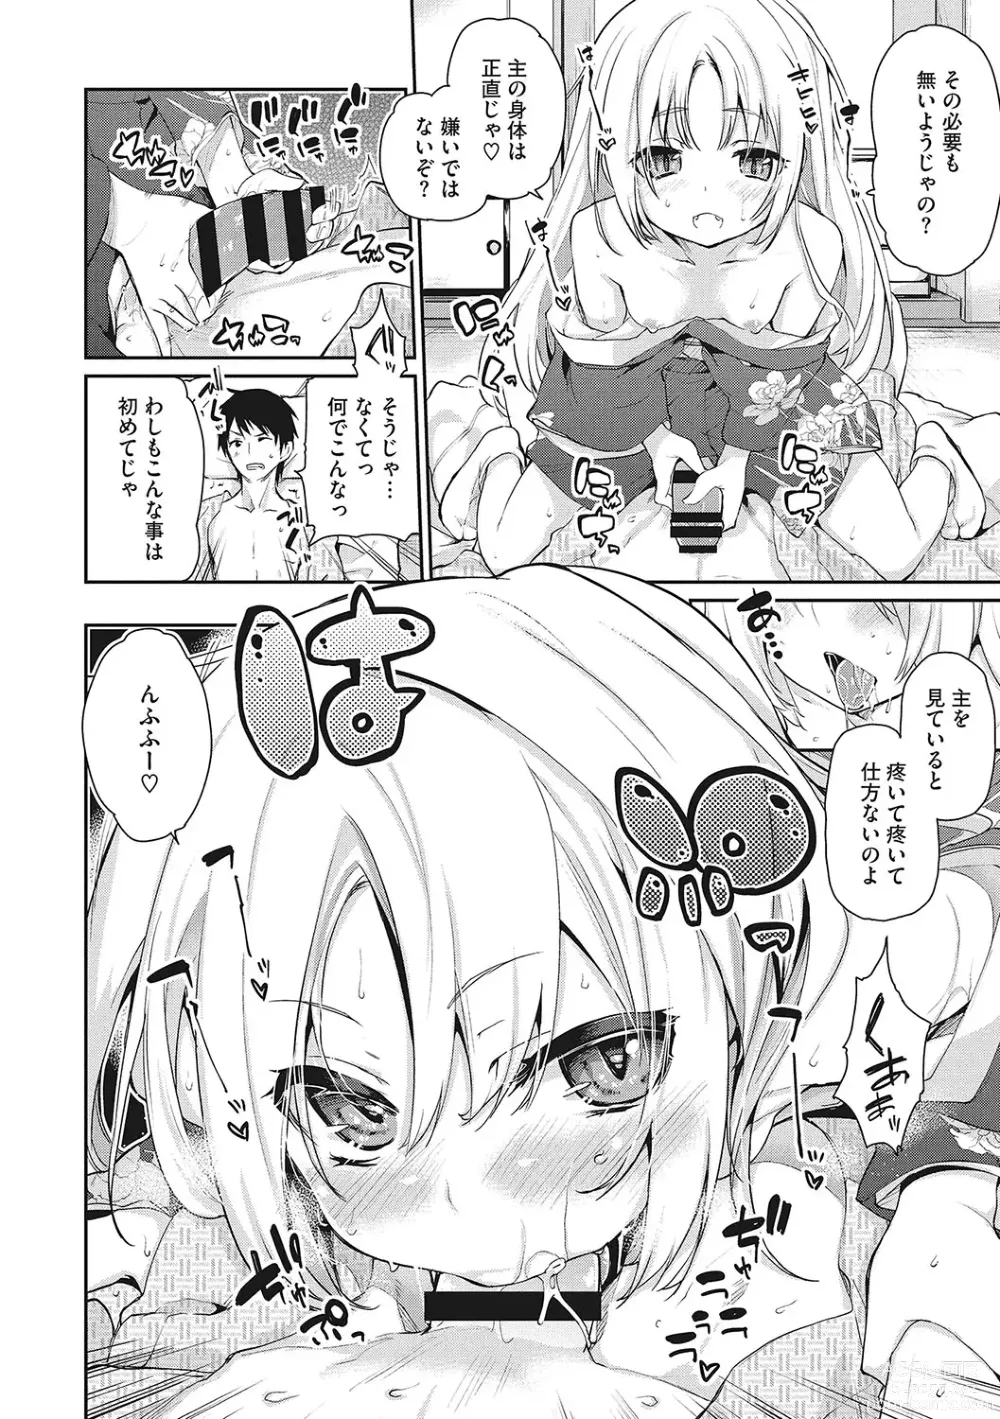 Page 17 of manga LQ -Little Queen- Vol. 54